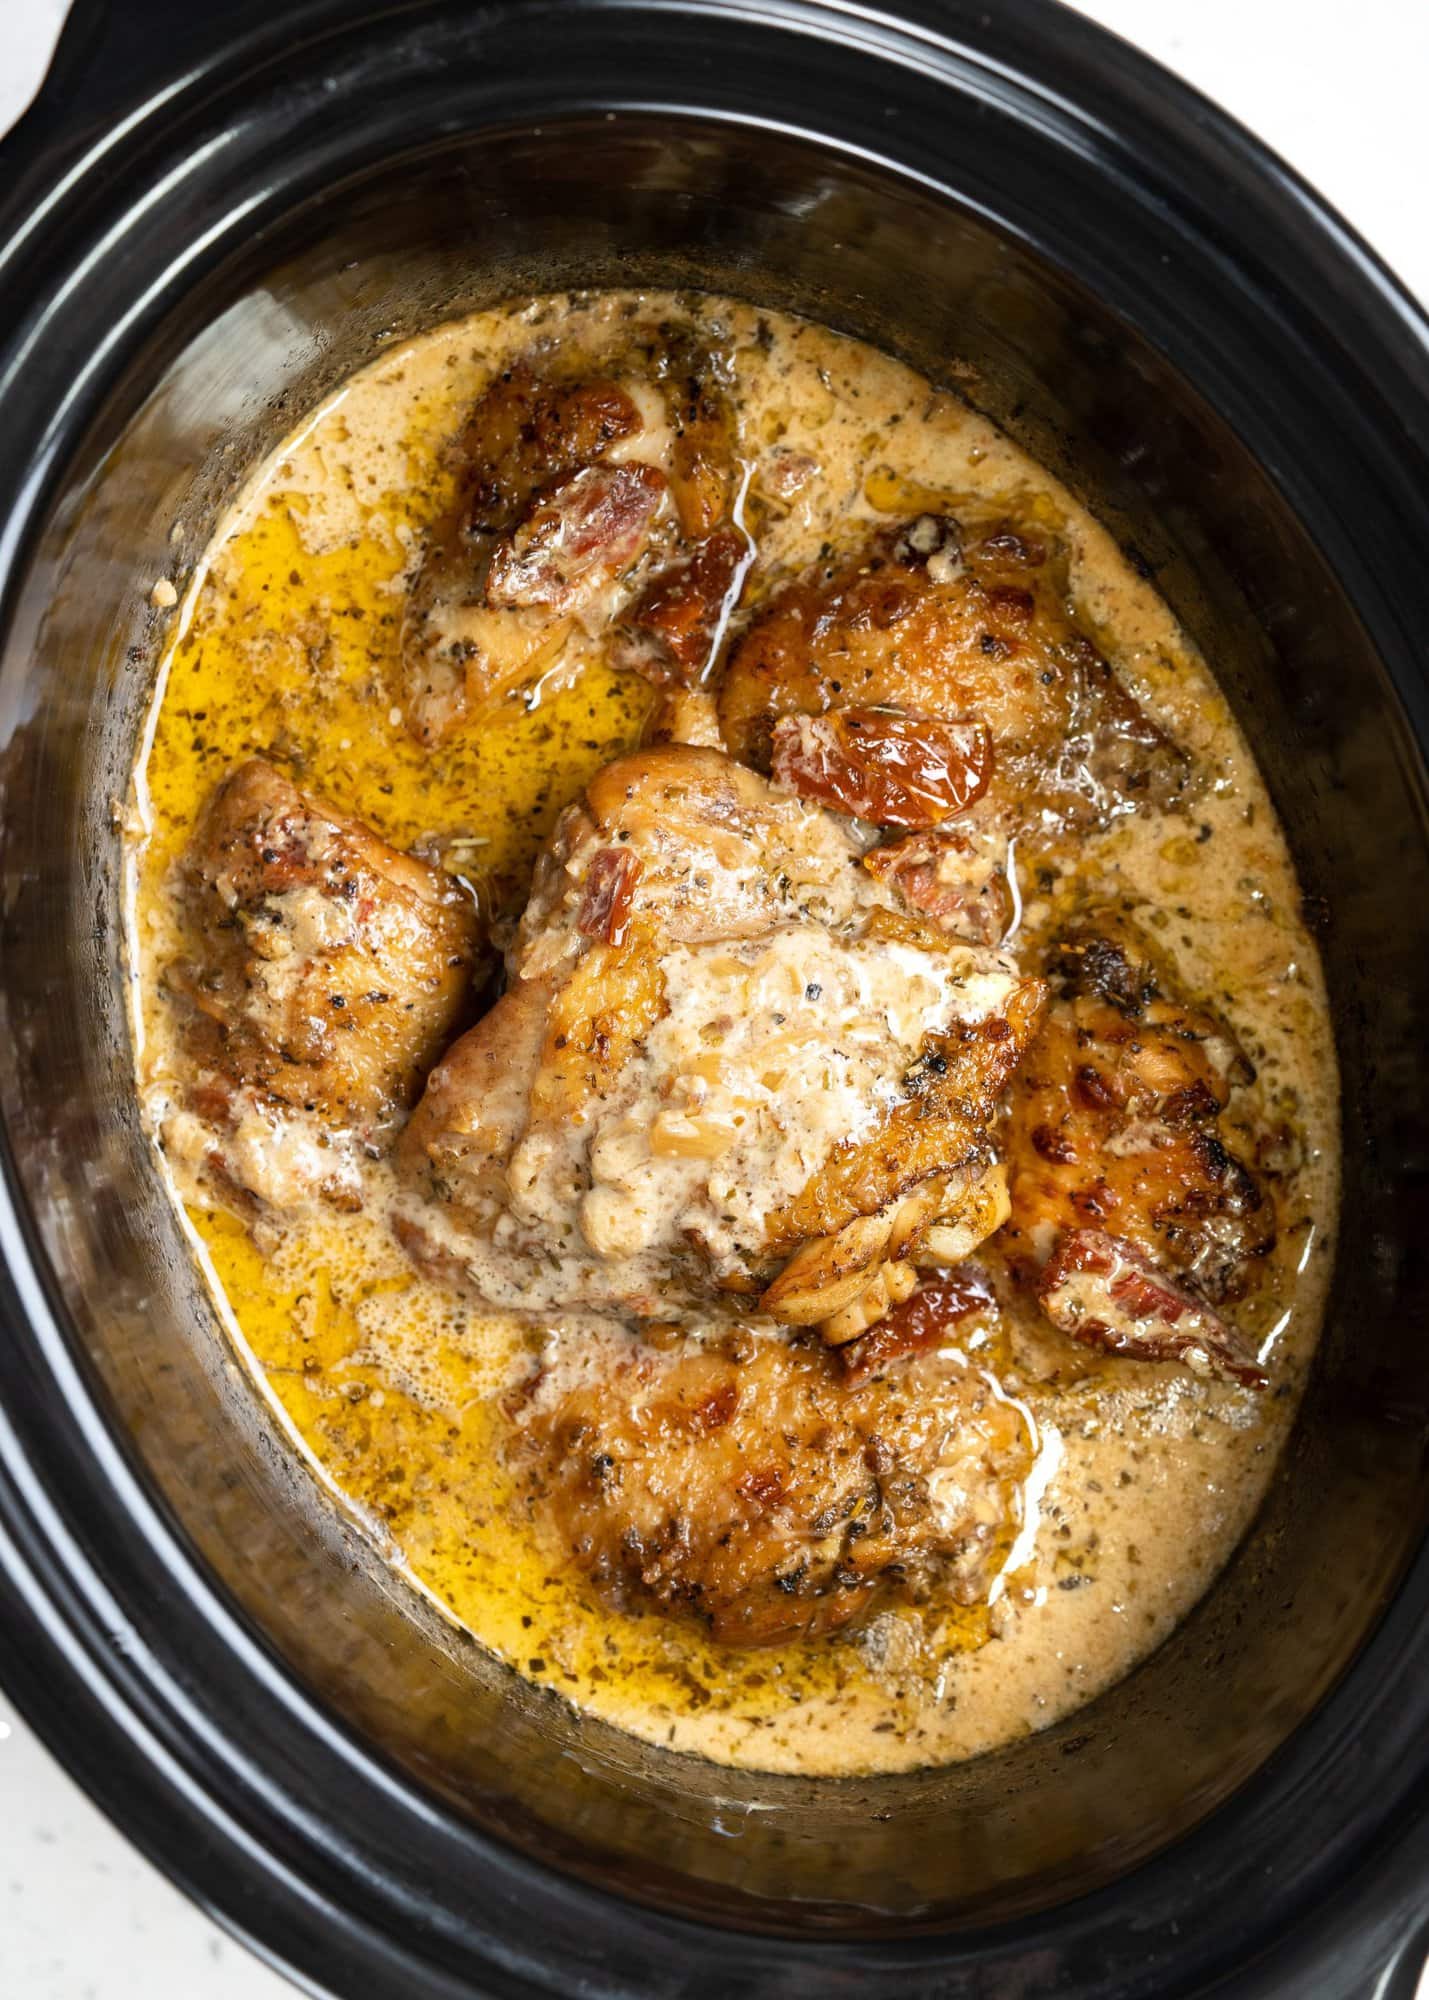 Chicken thighs are cooked in a slow cooker until tender and fall off the bone. The creamy sundried tomato sauce is packed with flavor and perfect to spoon over crispy chicken thighs. 